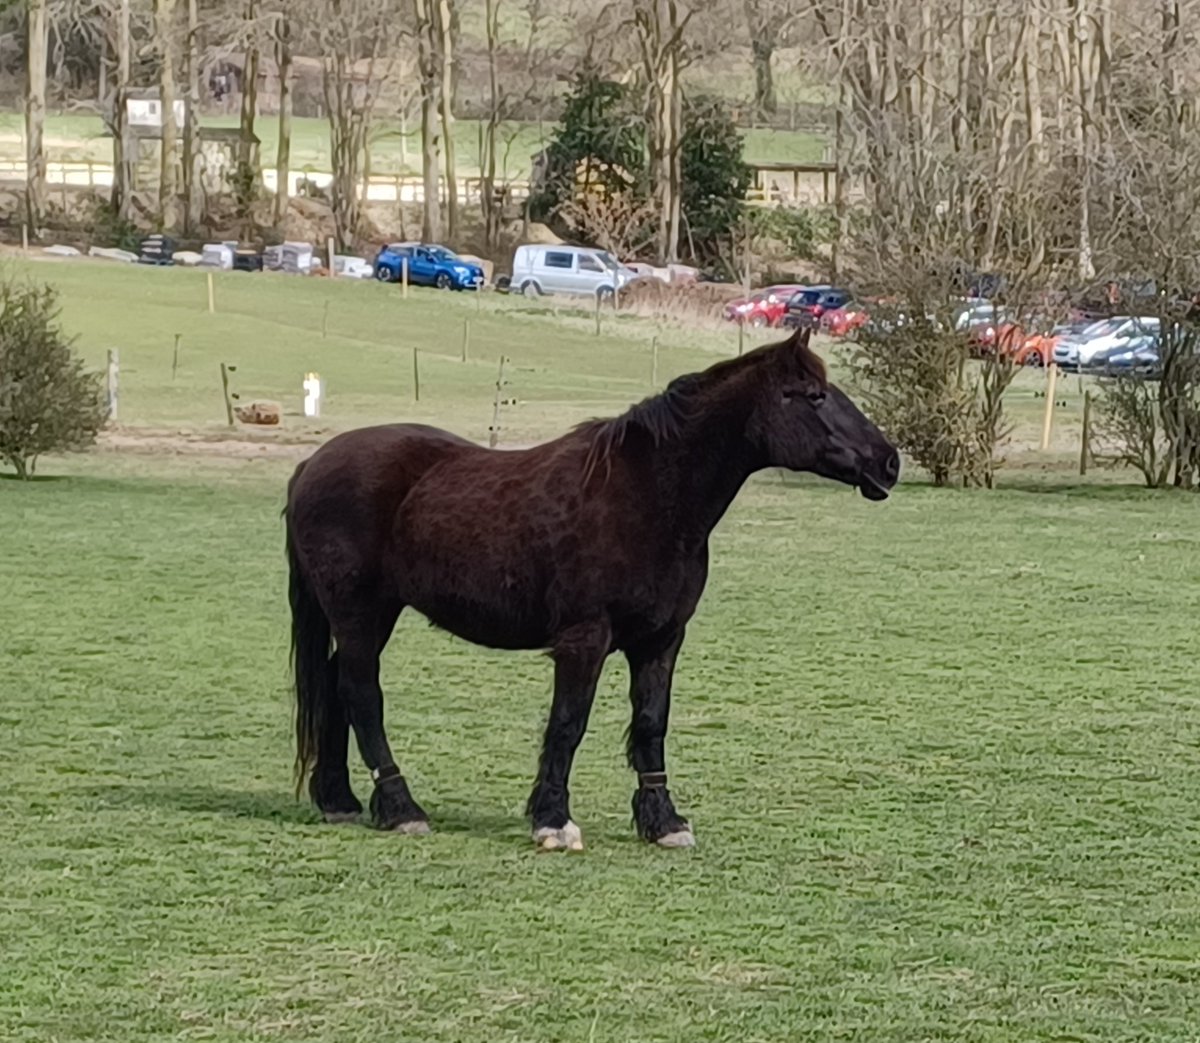 What a lovely Easter treat! A wonderful walk around @manechance with delicious tea and crumpets afterwards. Thank you to all the staff, volunteers and @springmeister for making it possible for us to be able to see the fantastic horses. @Kmbrow